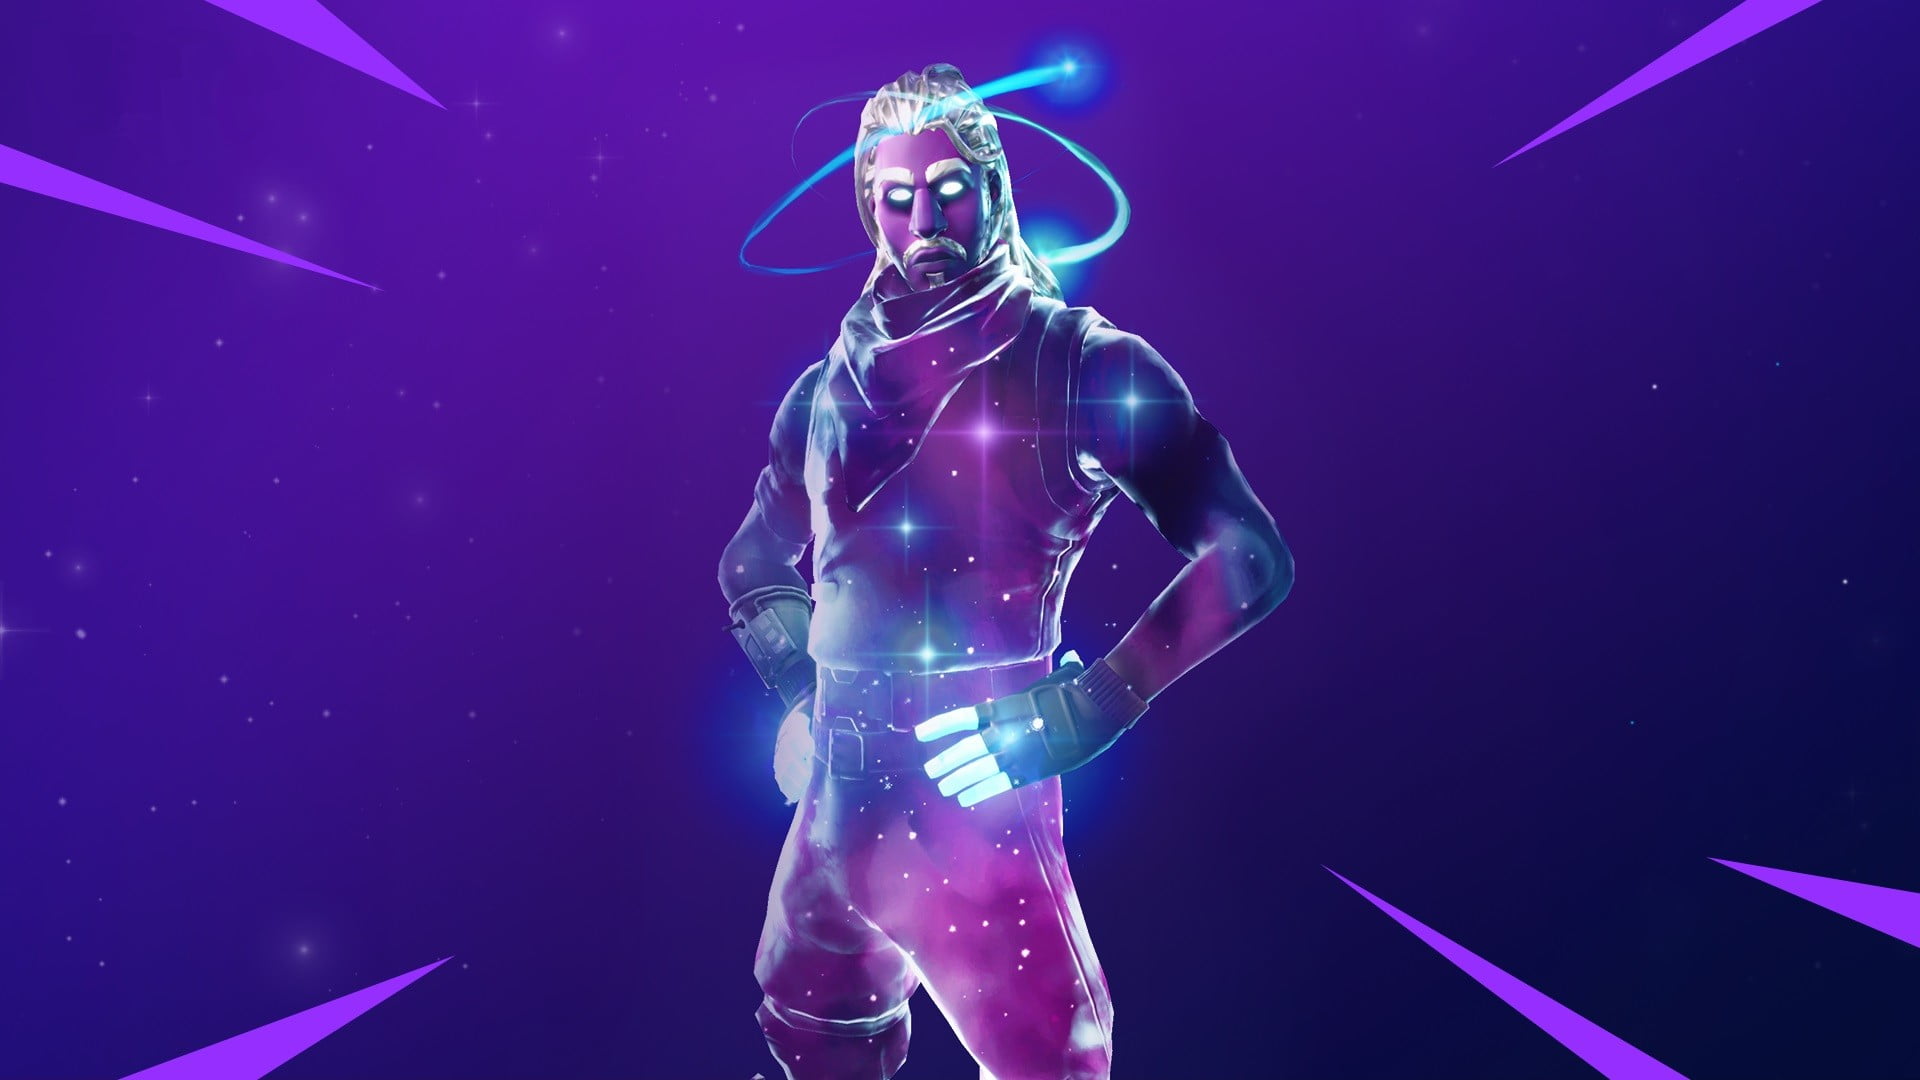 Fortnite Galaxy Skin HD Wallpaper 4279 Wallpapers and Free Stock